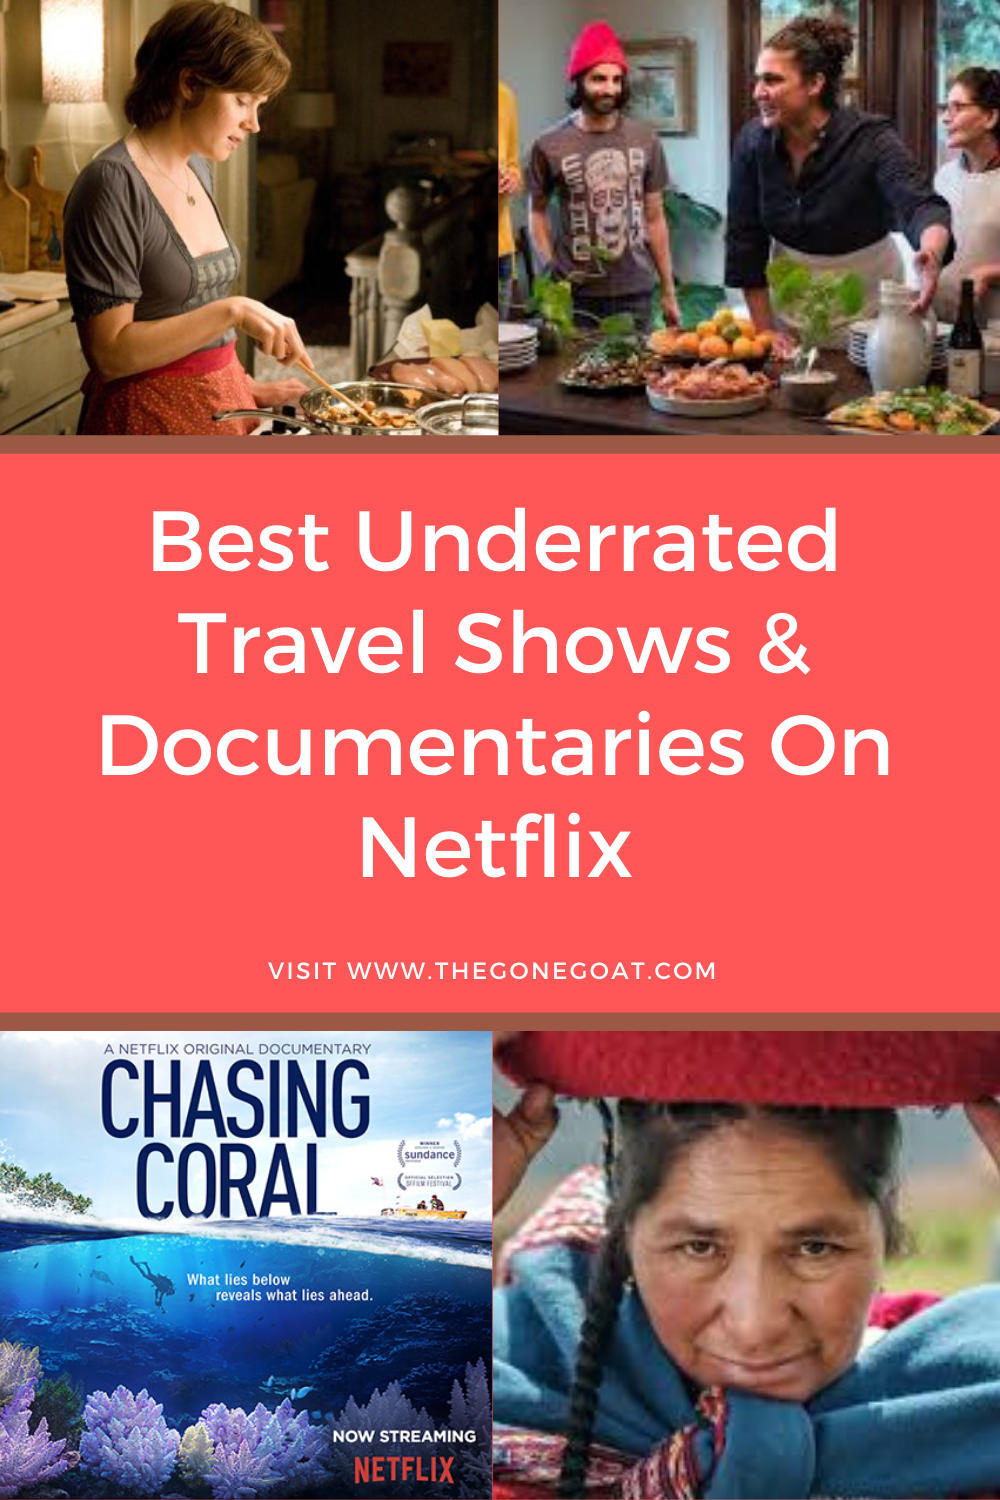 The best travel shows and documentaries on Netflix inspire us to dream a little longer and be knee-deep in narratives to remind us that is a world out there waiting to be explored. Here are the best and most underrated travel shows and documentaries…